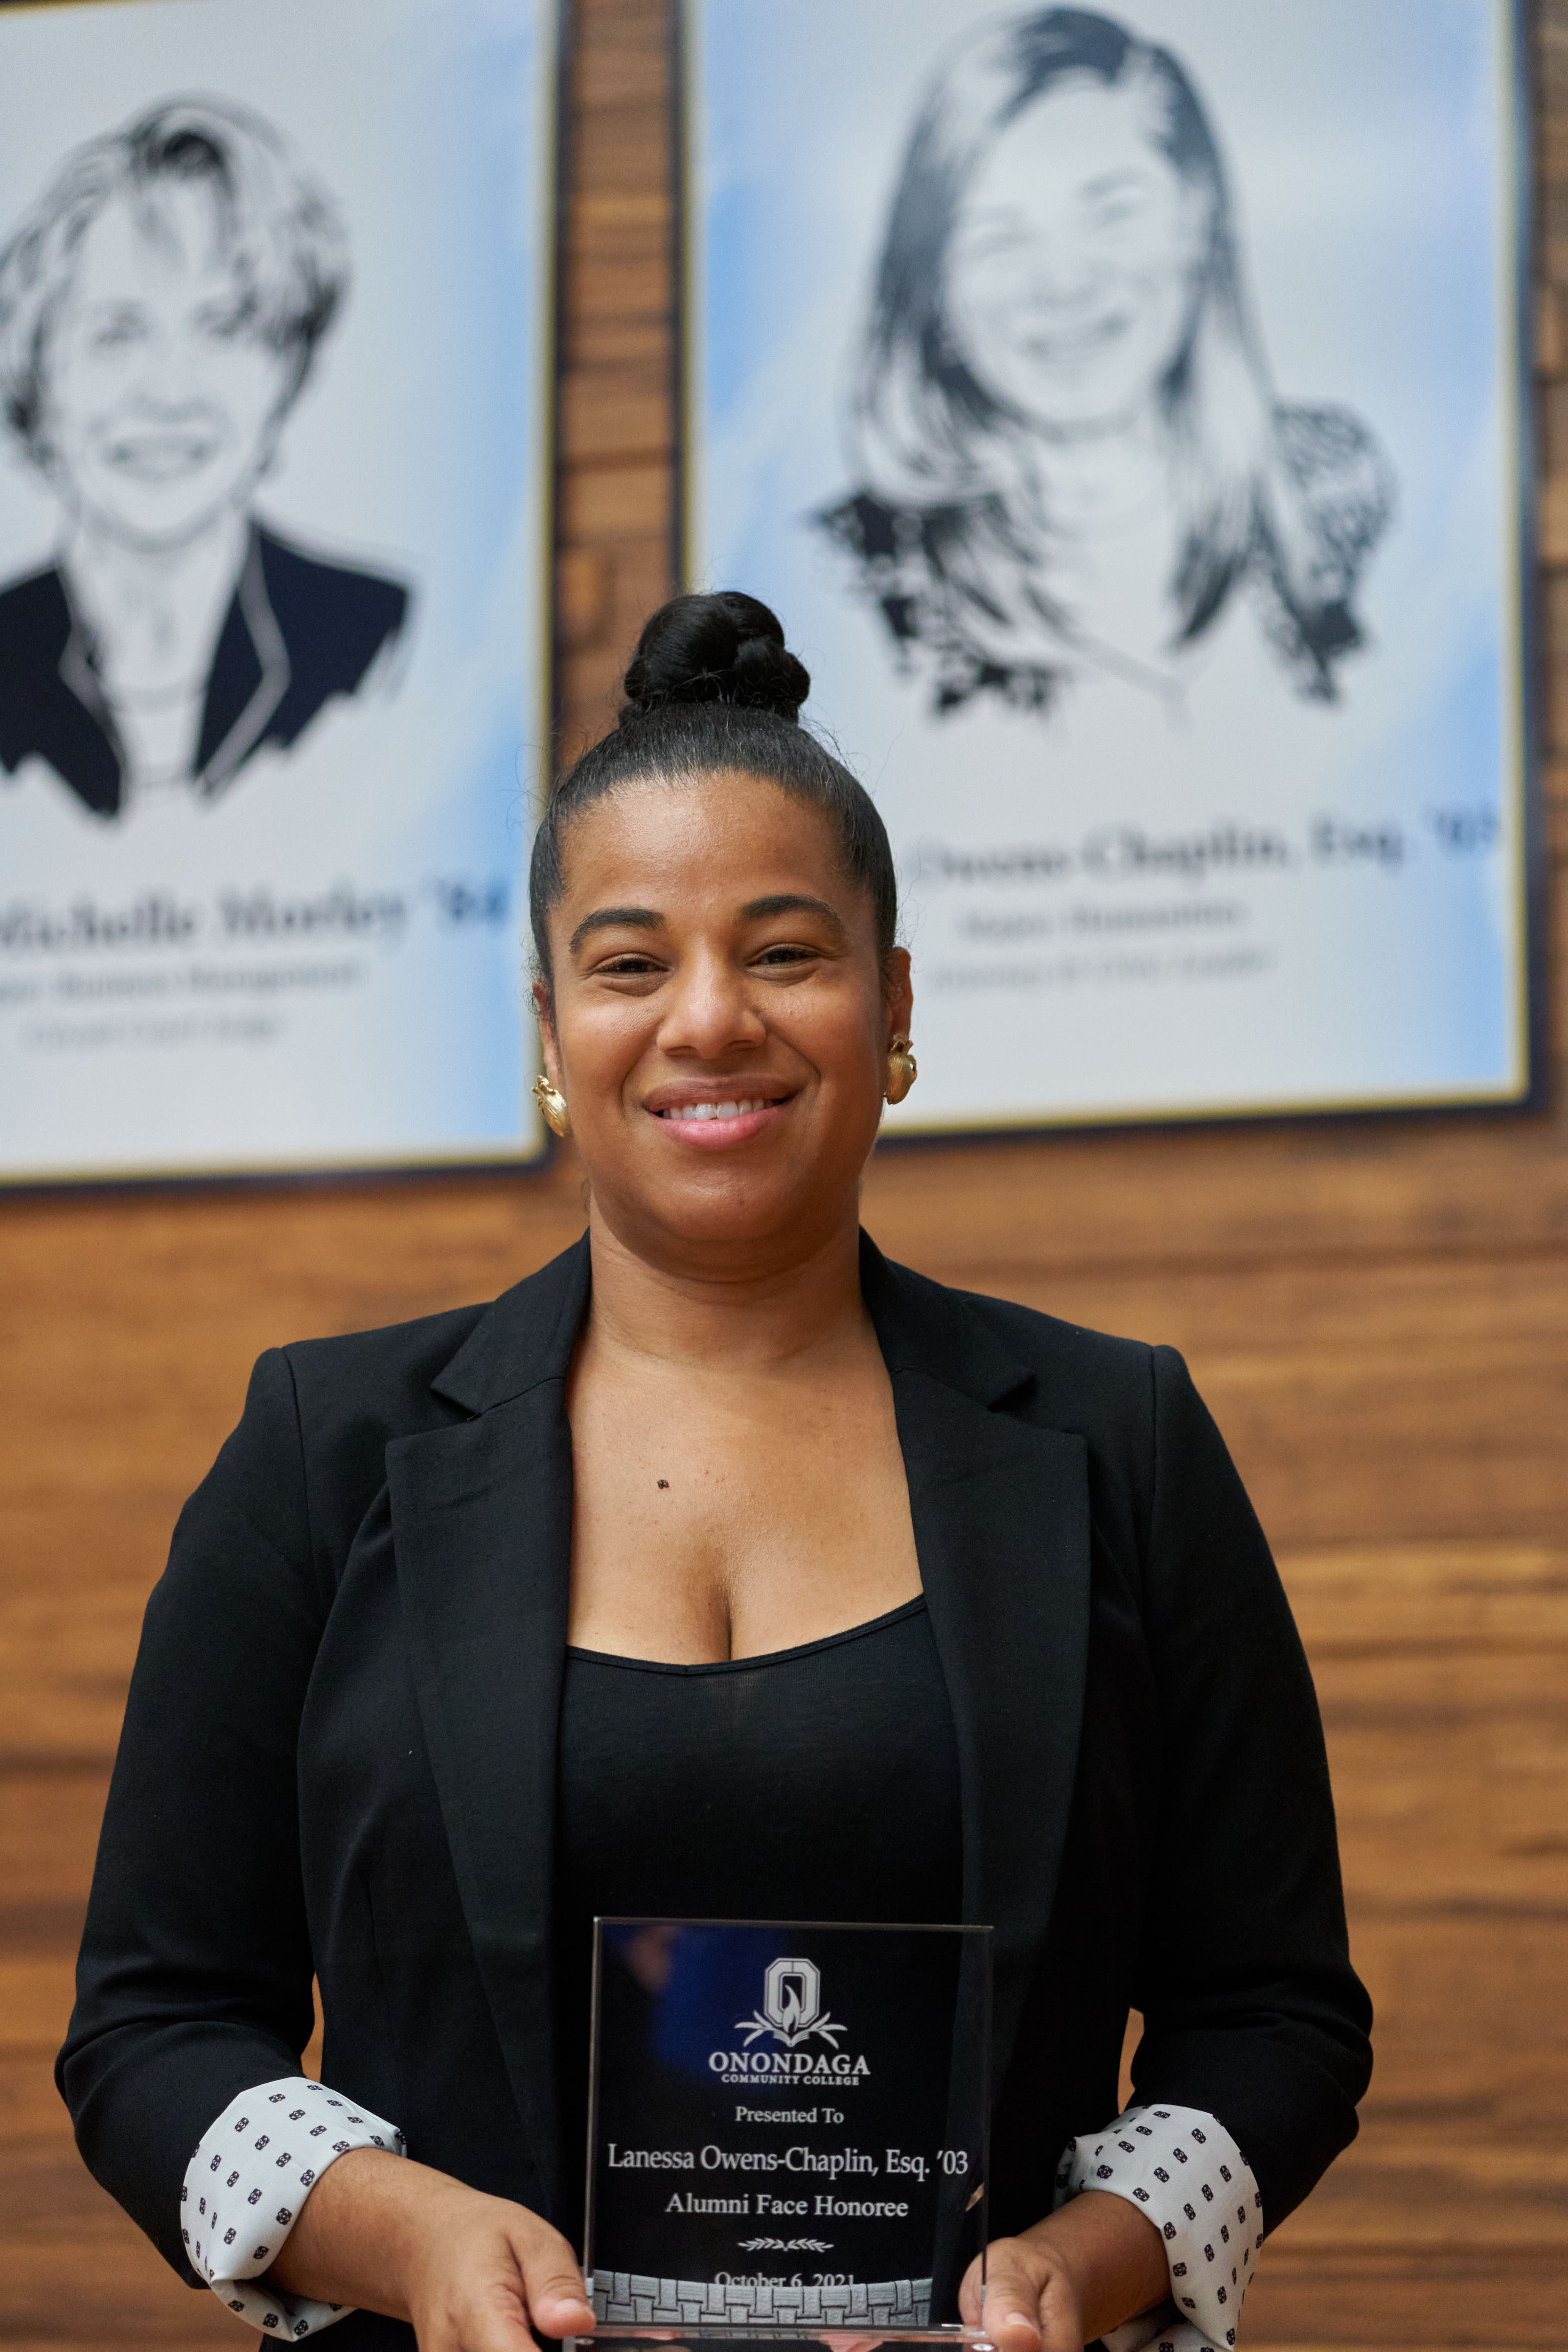 Lanessa Owens'Chaplin '03 became an OCC Alumni Faces honoree in 2021.